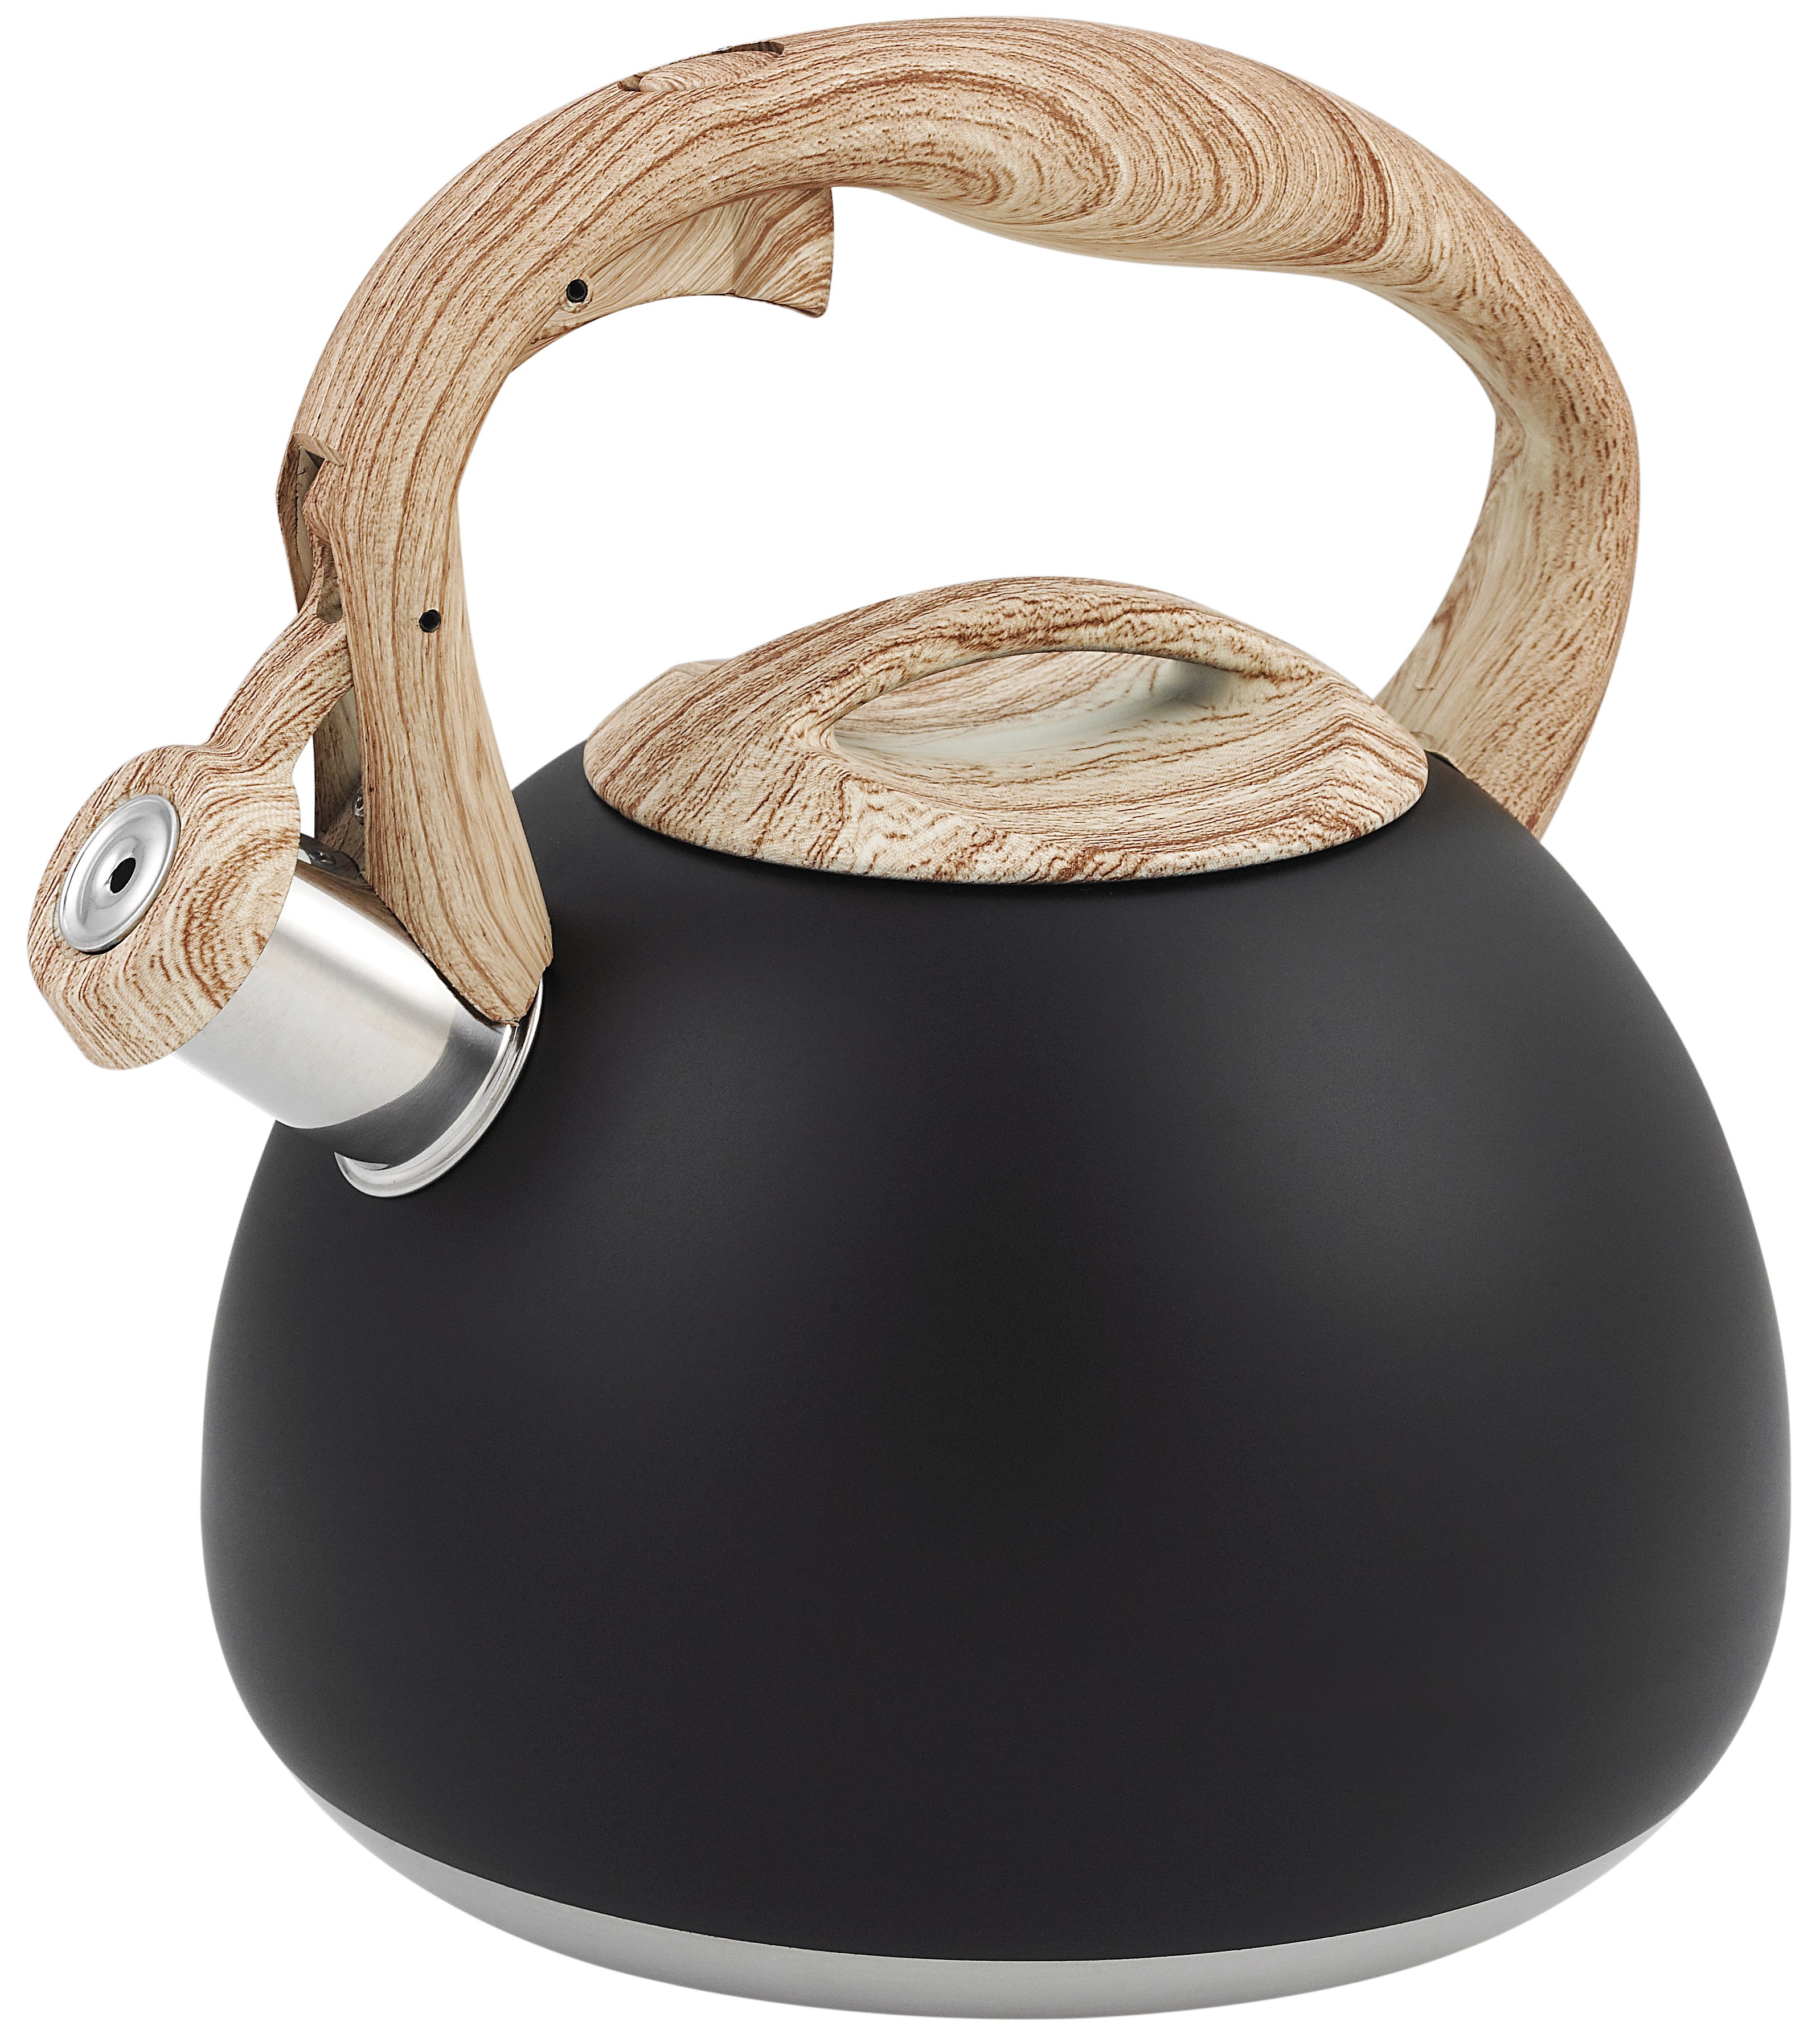 Whistling Kettle - A Guide to Buying a Whistling Kettle